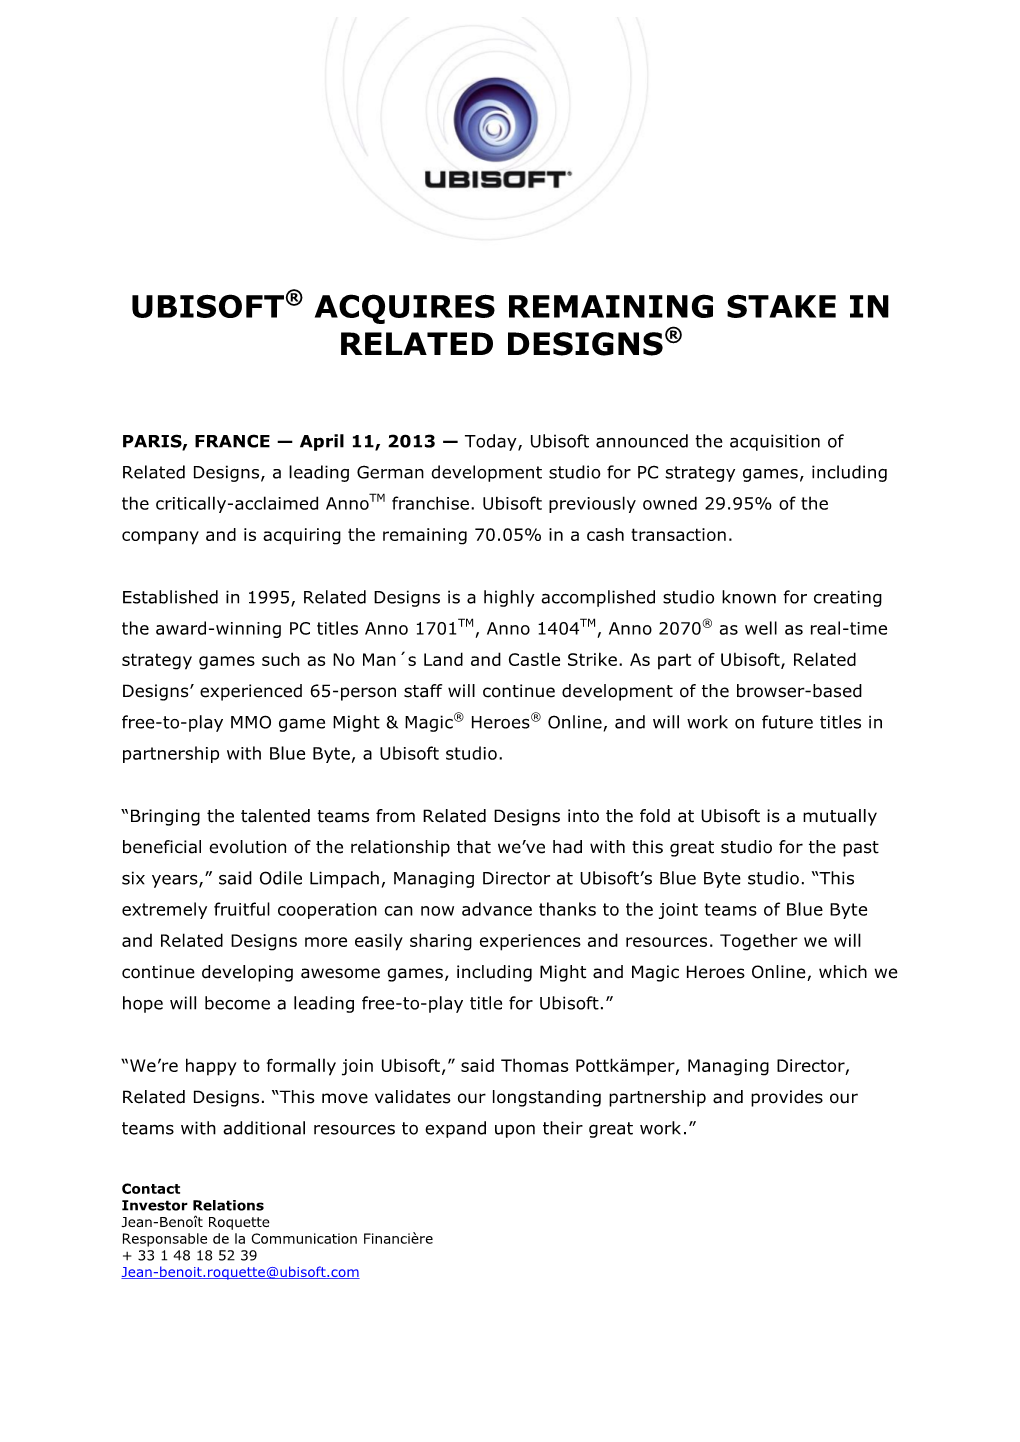 Ubisoft® Acquires Remaining Stake in Related Designs®